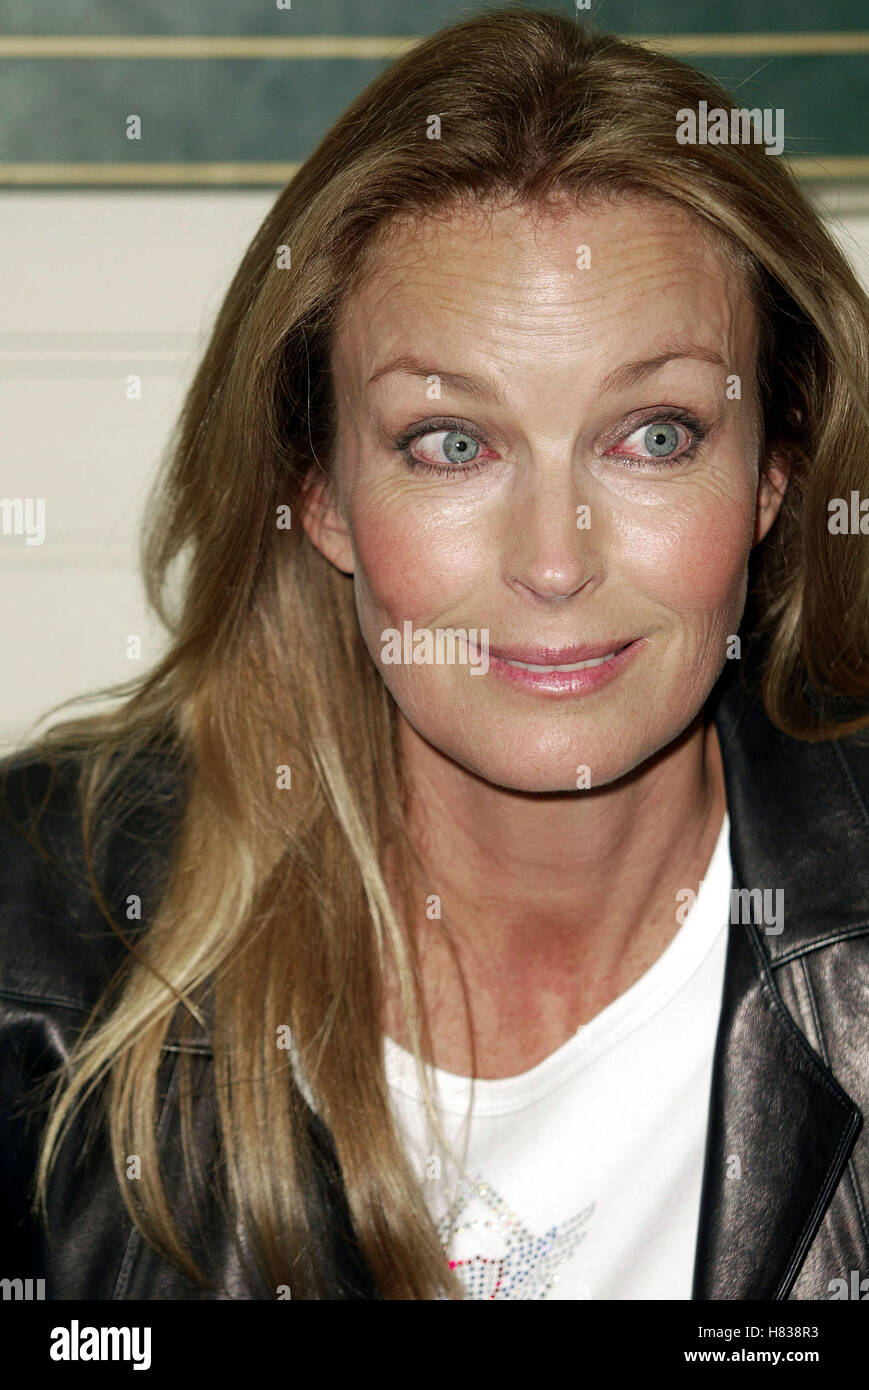 BO DEREK RIDING LESSONS BOOK SIGNING CENTURY CITY LOS ANGELES USA 01 March 2002 Stock Photo